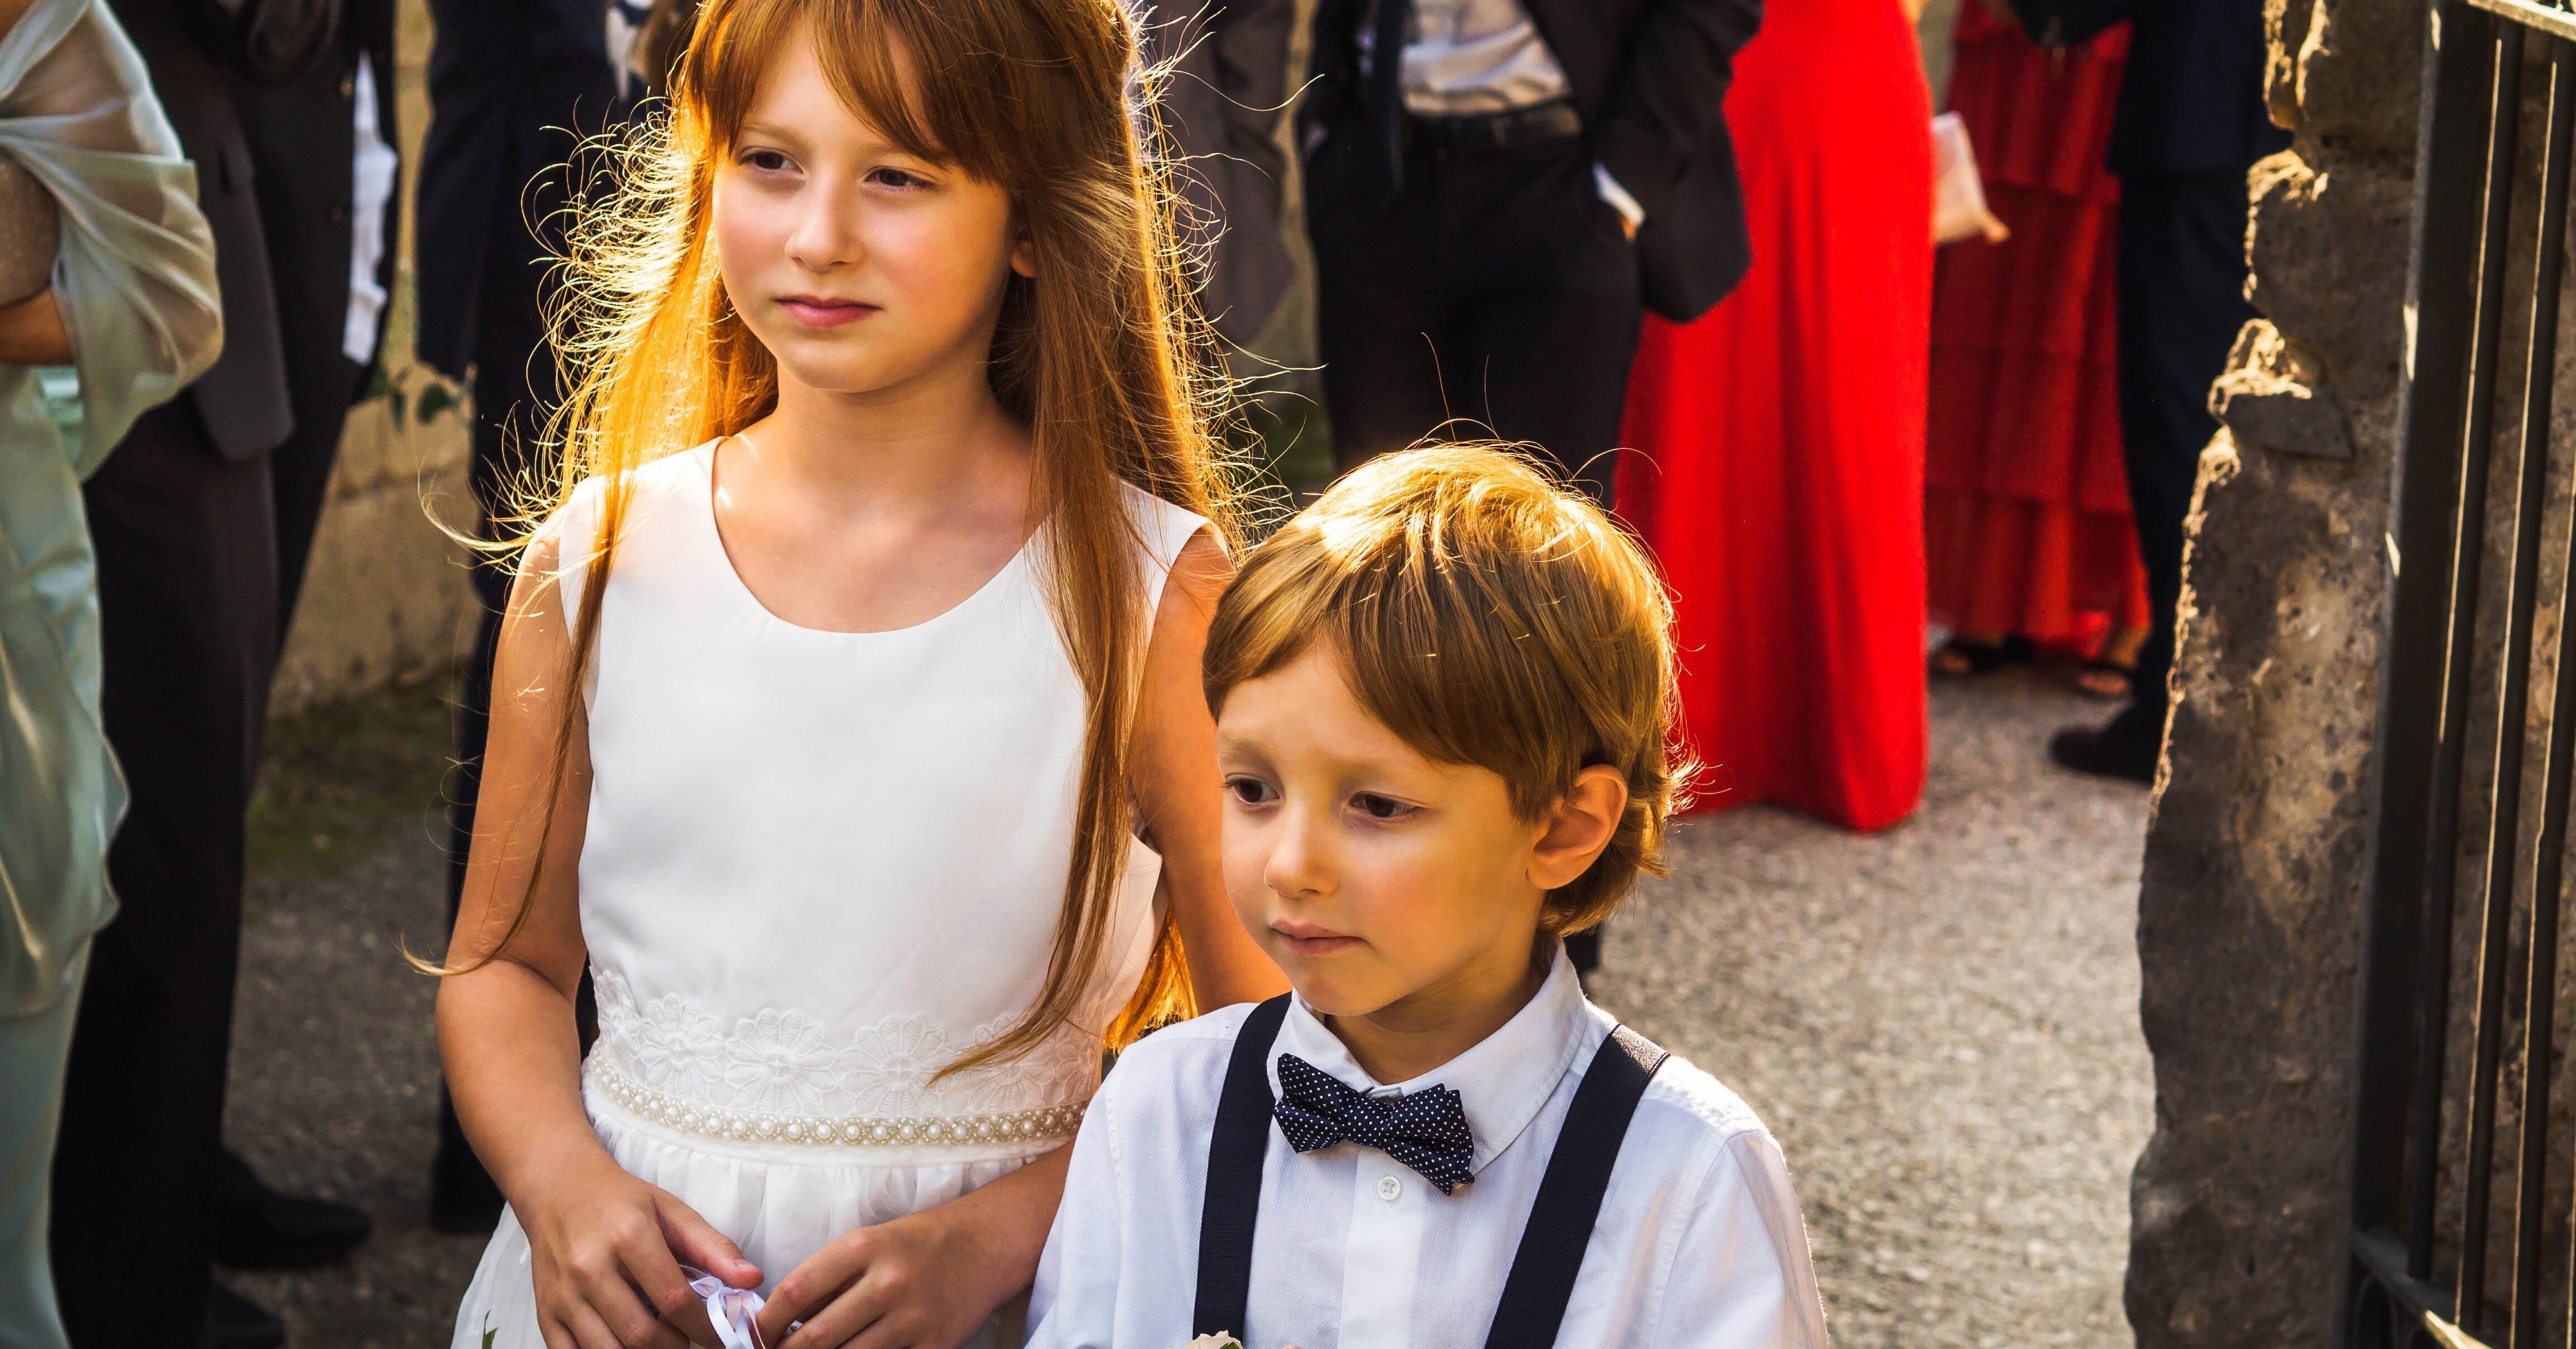 roles for the kids during the wedding